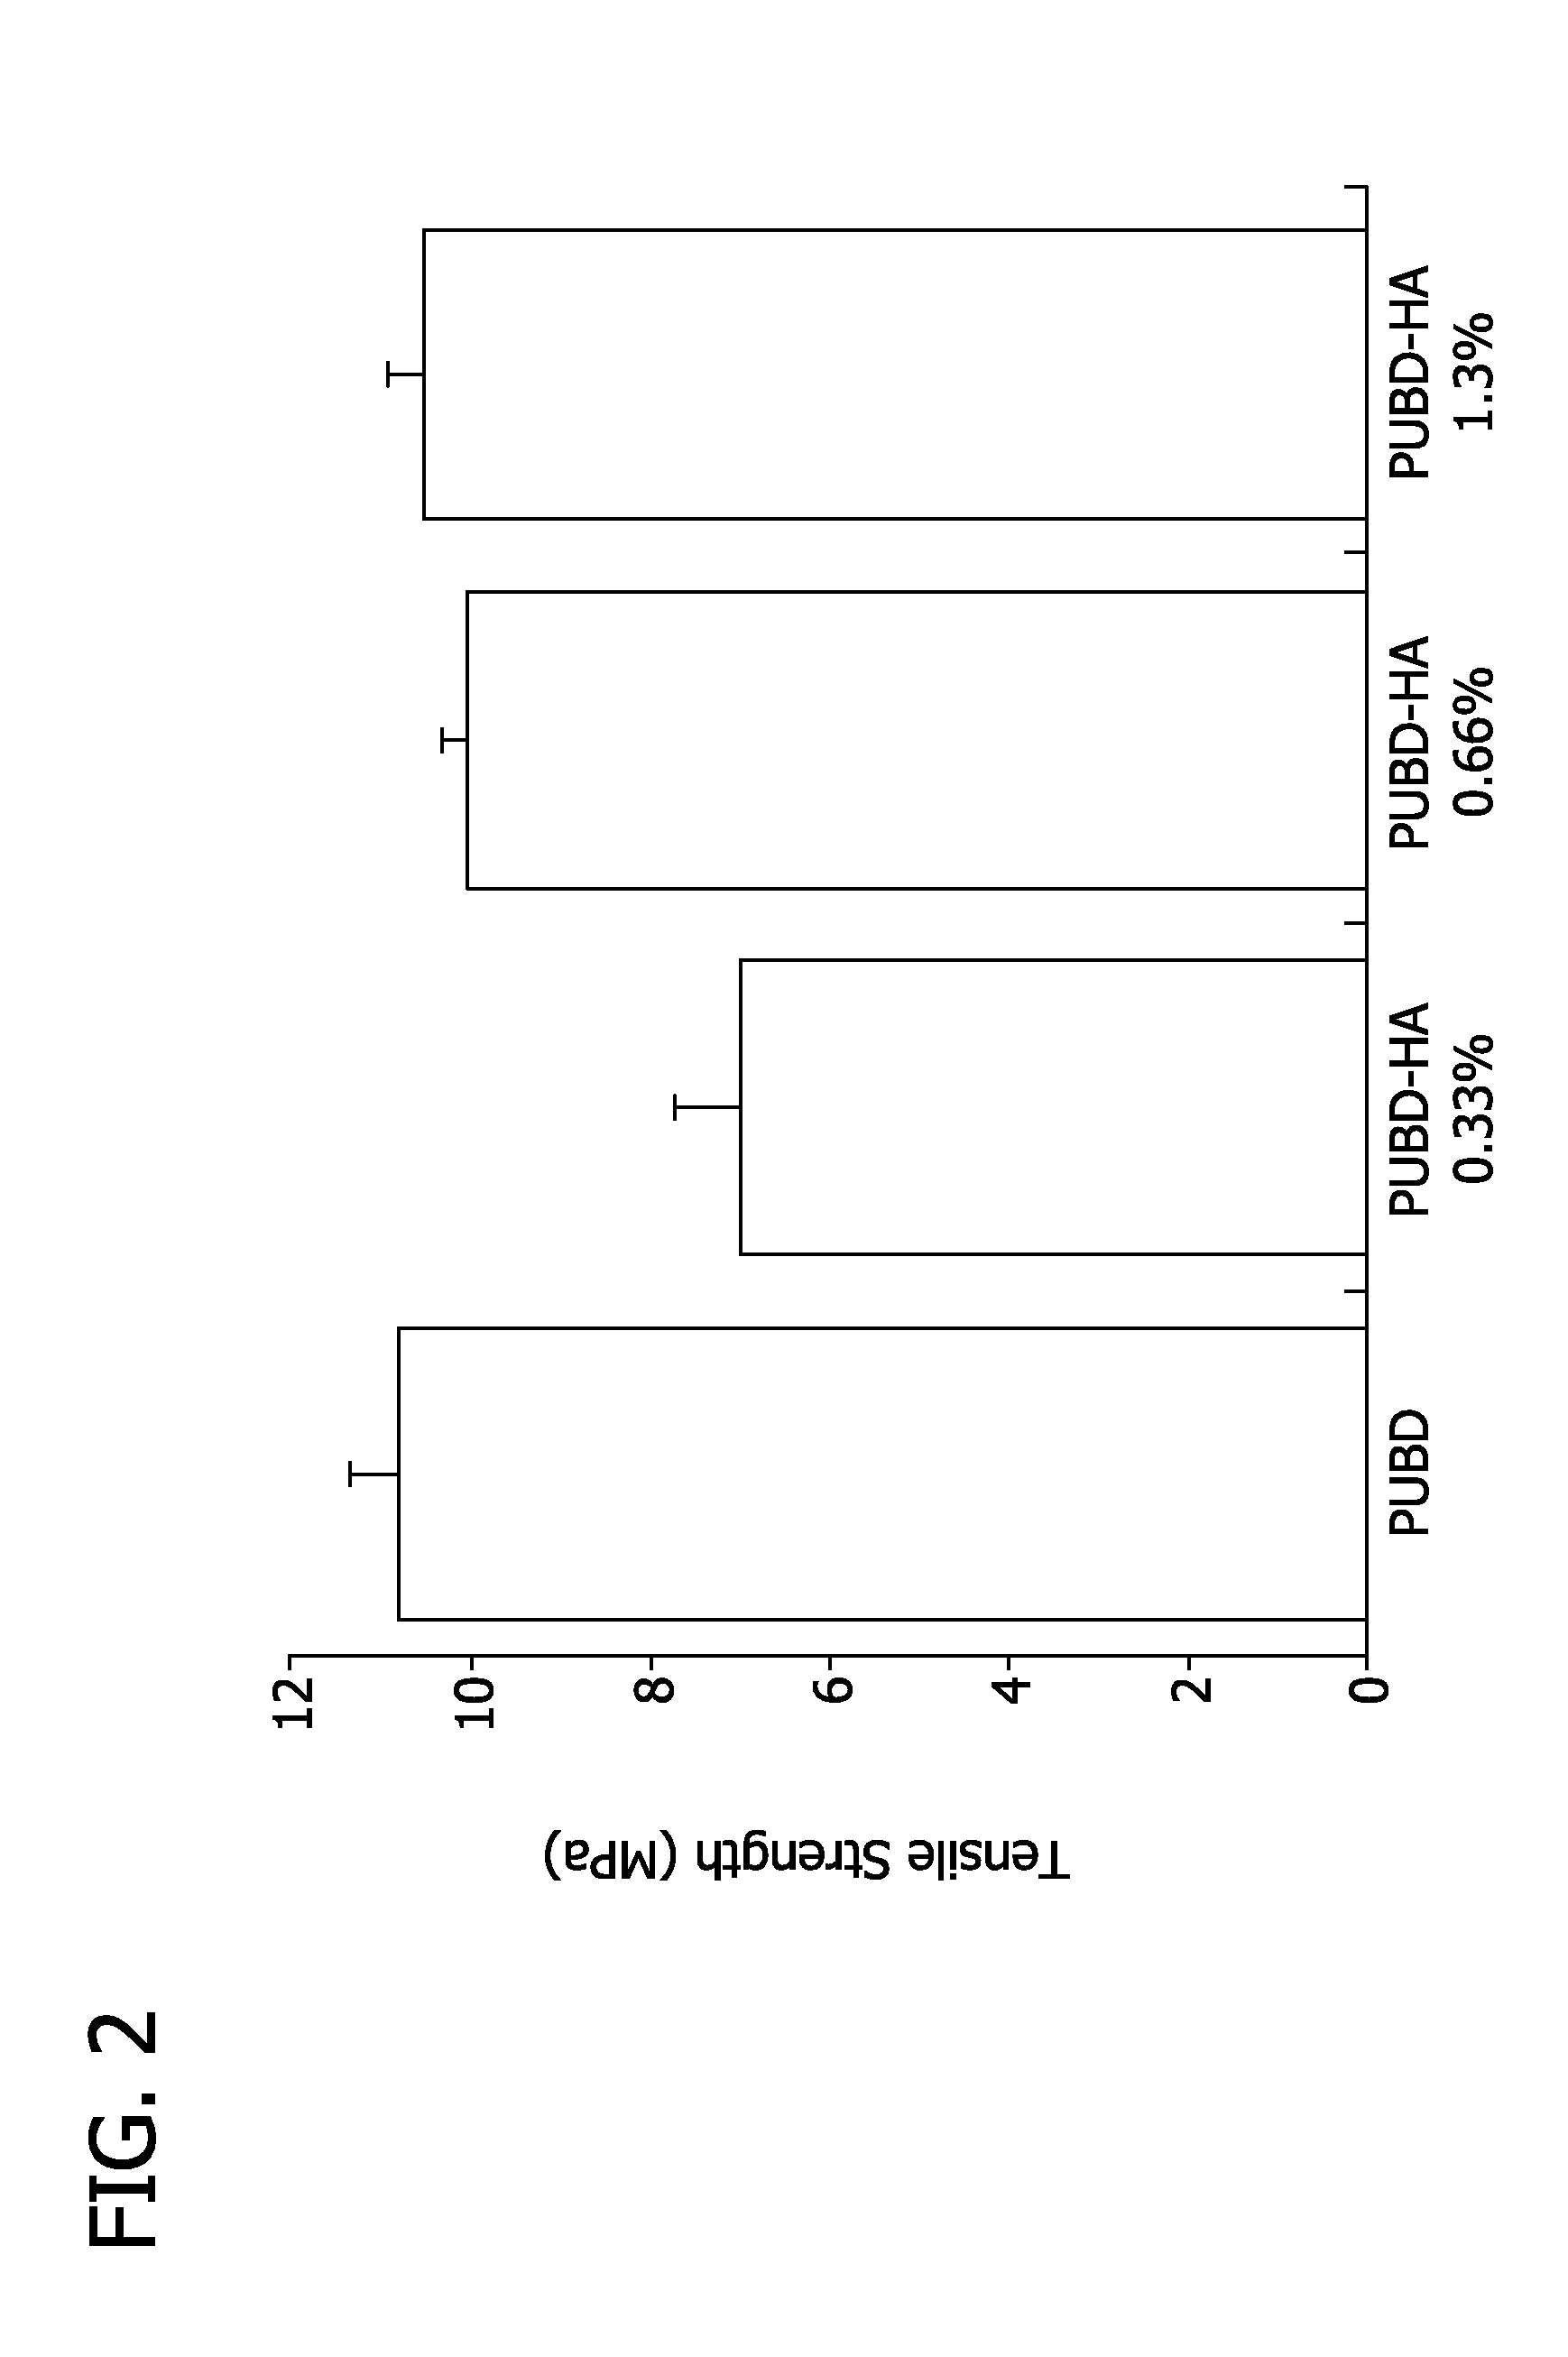 Aneurysm occlusion device containing bioactive and biocompatible copolymer shell and biocompatible metallic frame member